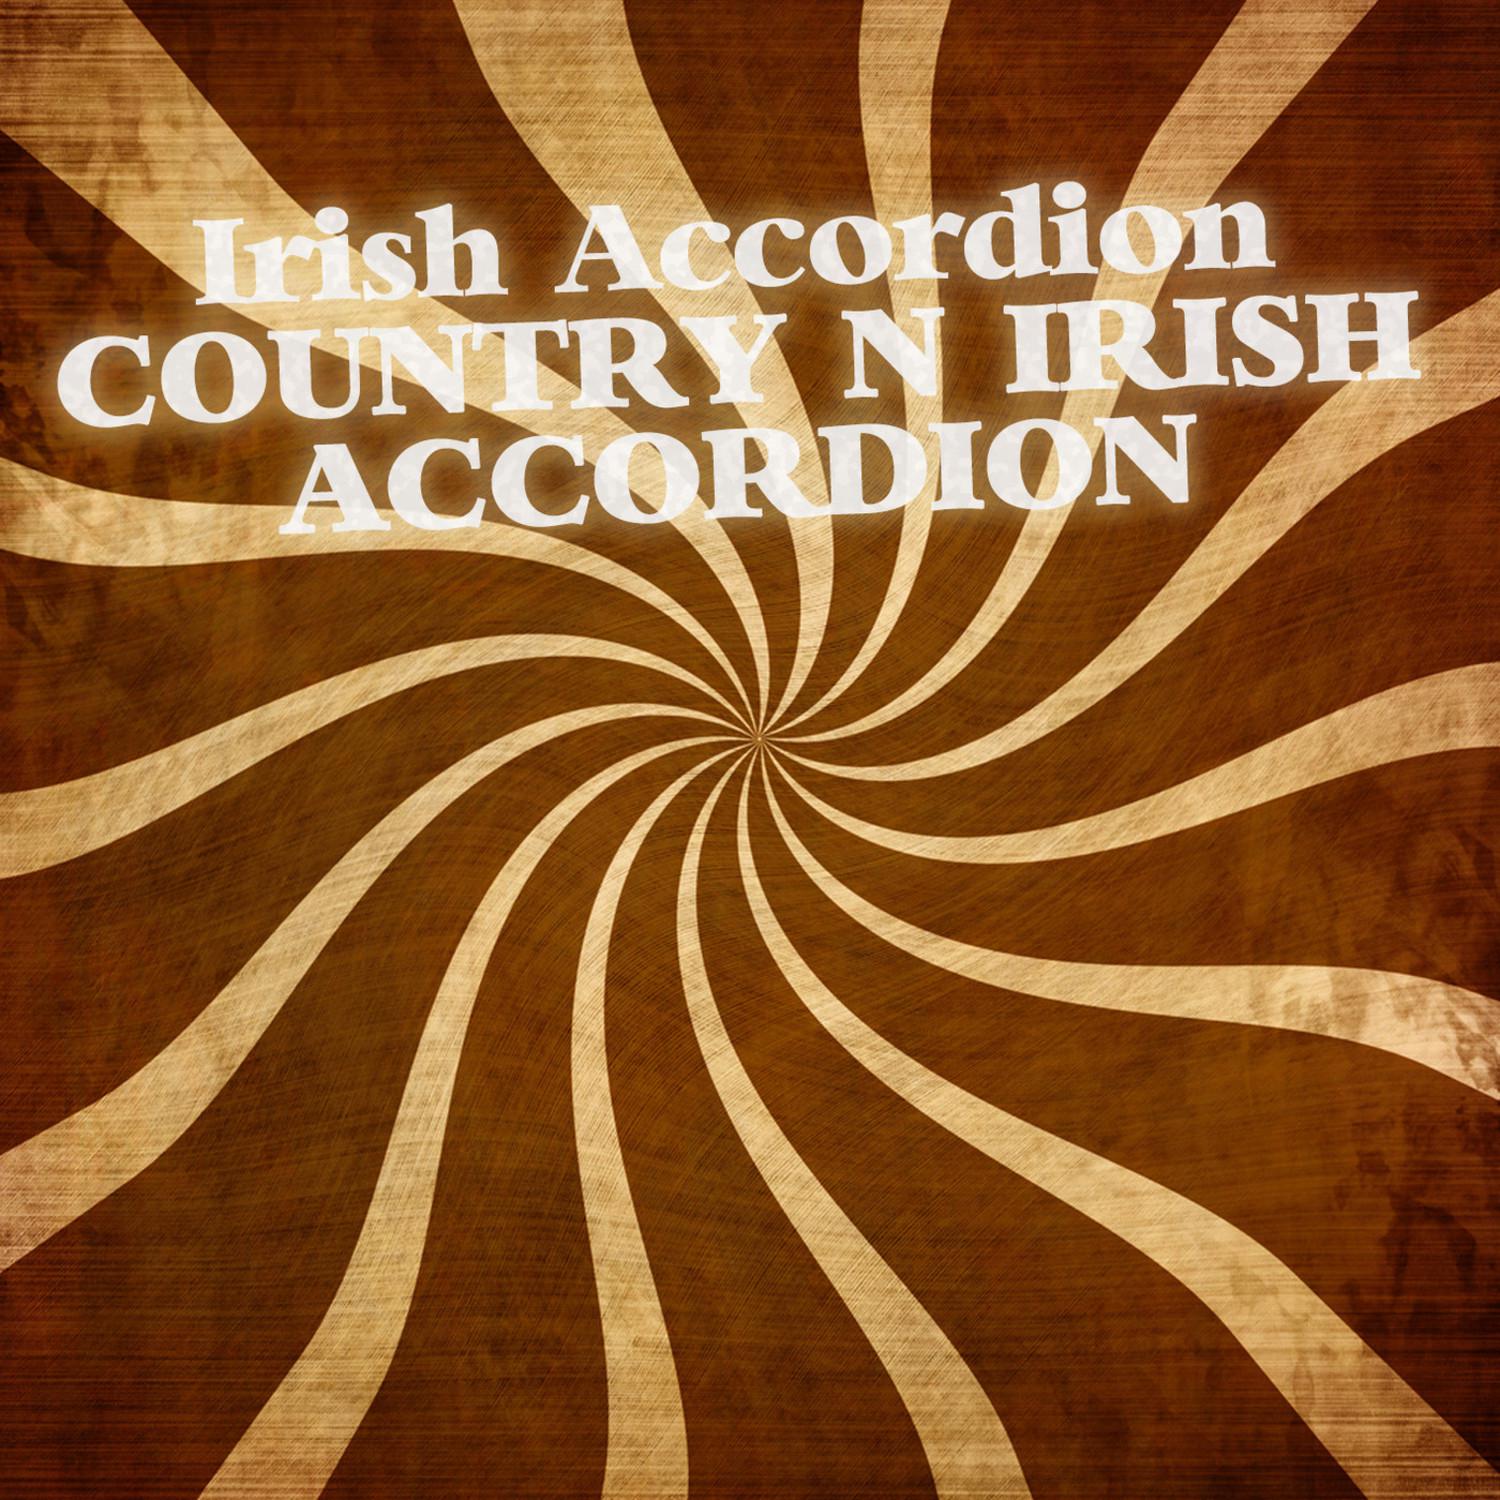 I. When Irish Eyes Are Smiling, II. Dublin In The Rare Old Times, III. Fields Of Athenry